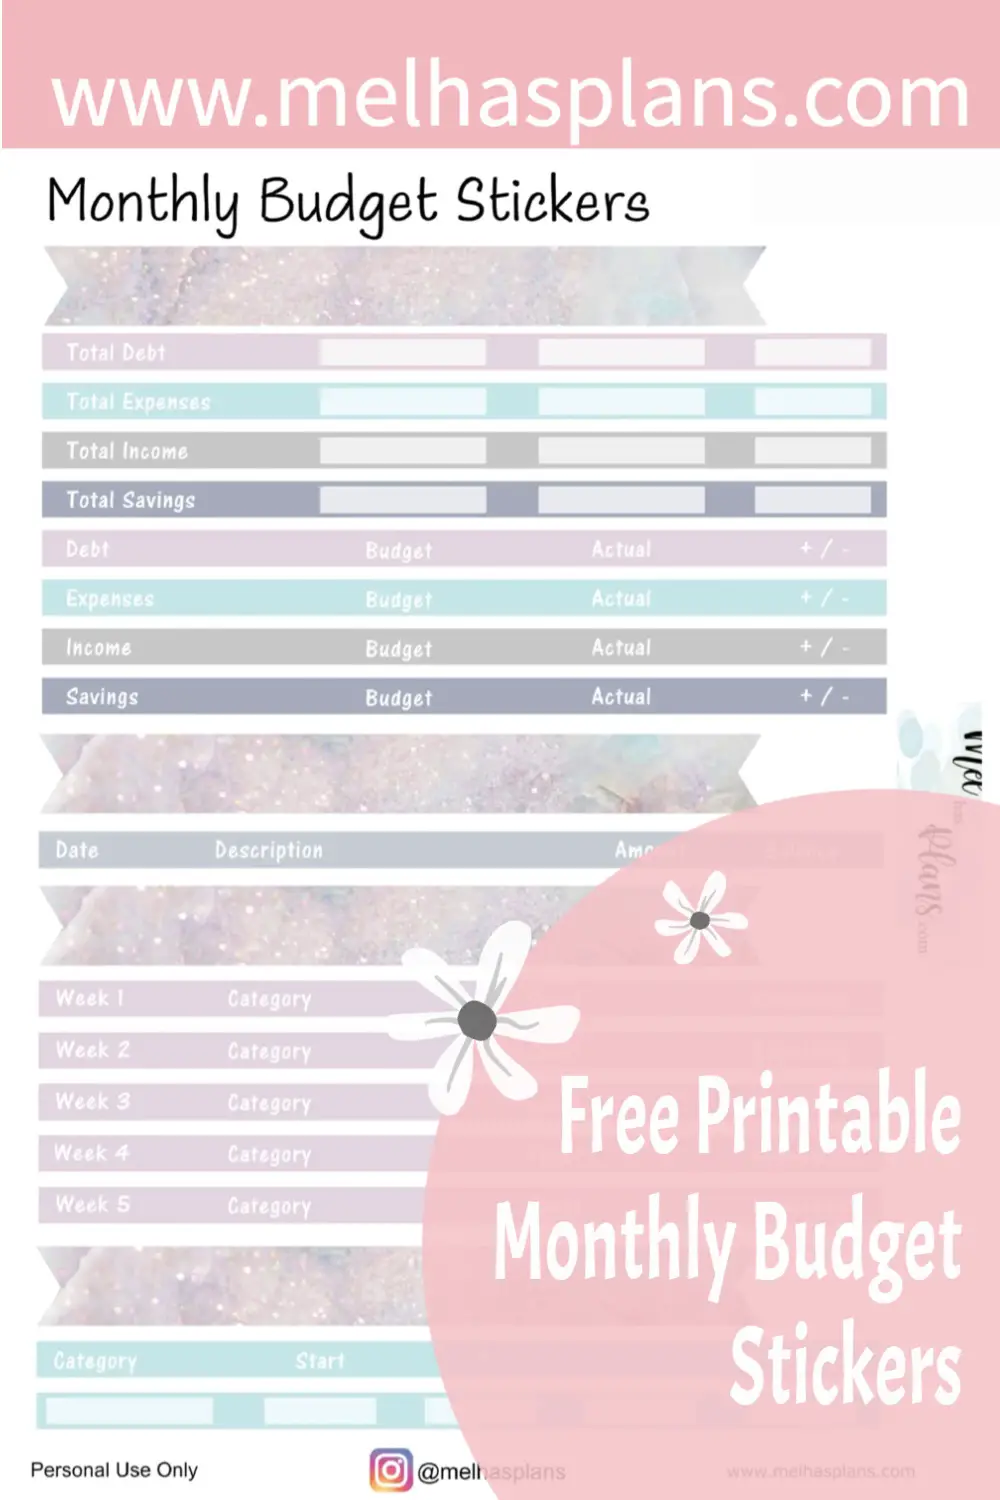 Monthly Budget Stickers